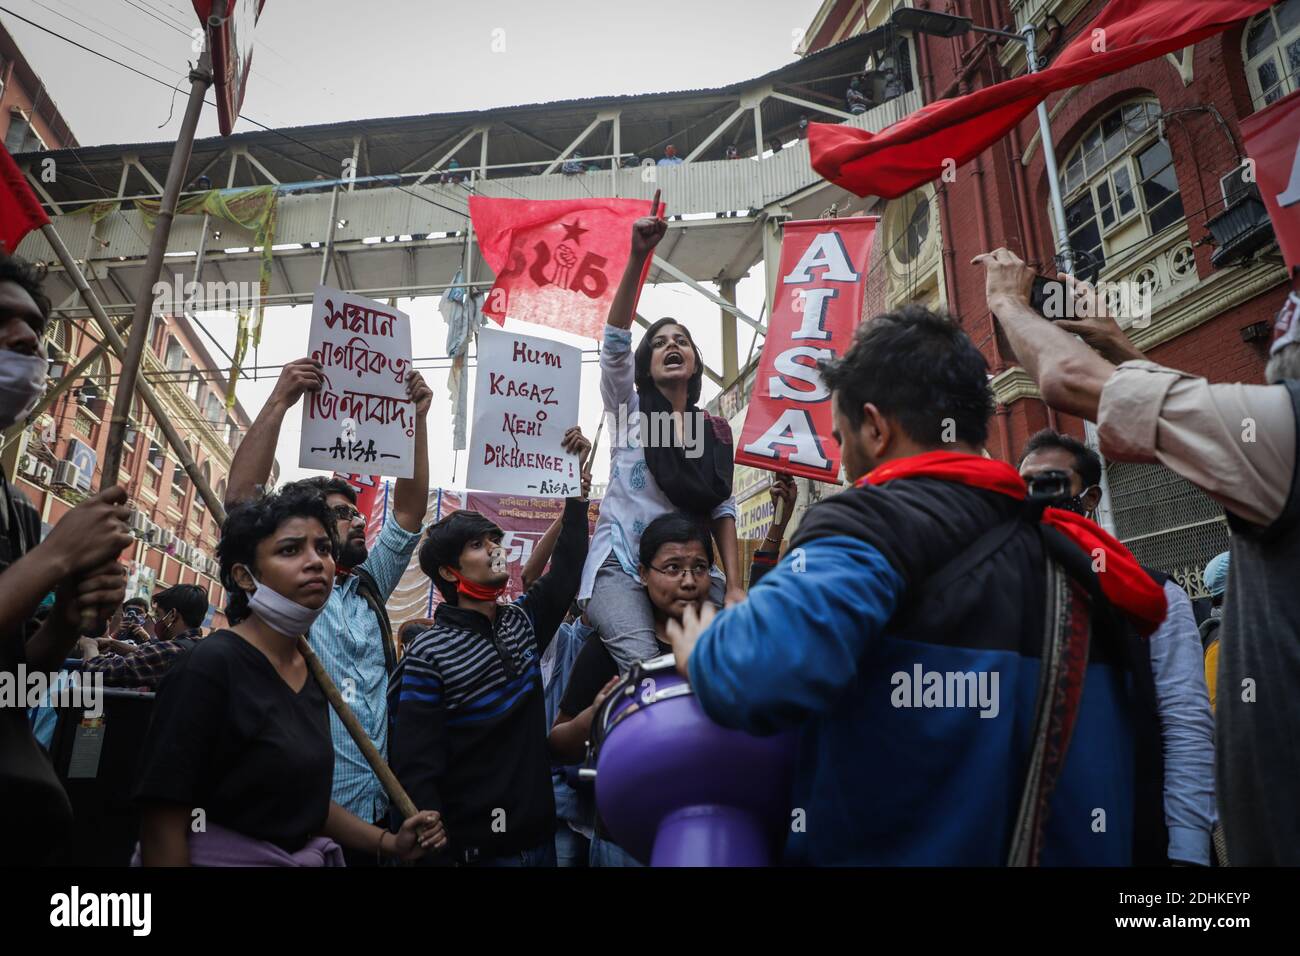 Kolkata, India. 11th Dec, 2020. A protester gesturing and chants in the crowd during the demonstration.Activists of AISA (All India Students' Association) staged a protest rally against NRC (National Register of Citizens), CAA (Citizenship Amendment Act) & Farm bill. Credit: SOPA Images Limited/Alamy Live News Stock Photo